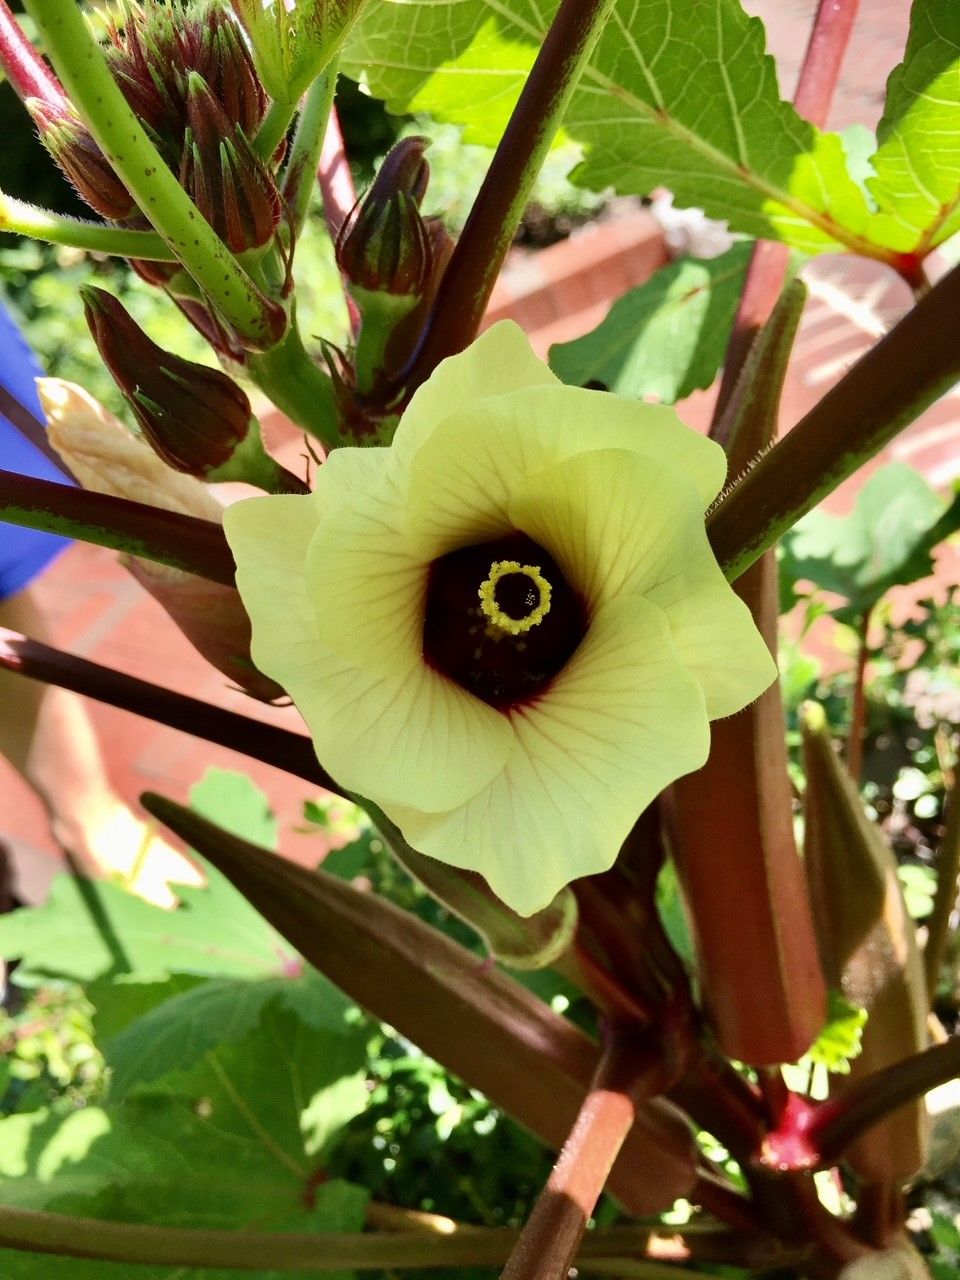 A yellow okra blossom with several dark red okra pods.